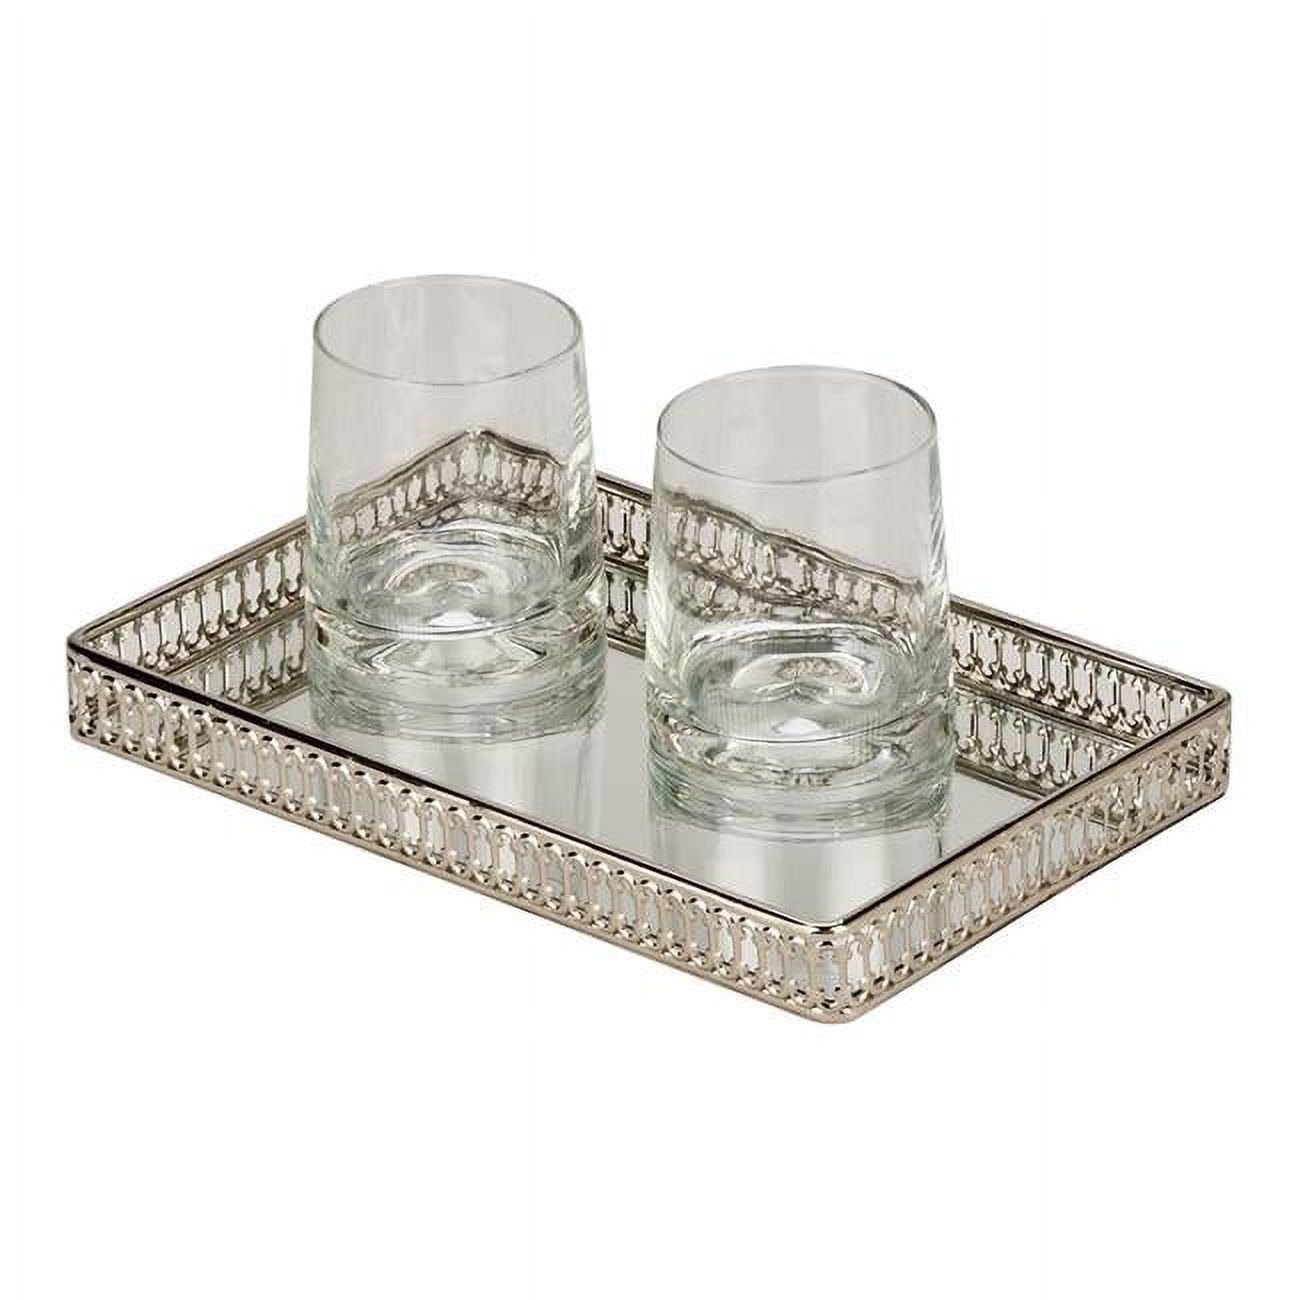 11 X 7 In. Nickel Plated Vanity Gallery Tray With Mirror - White